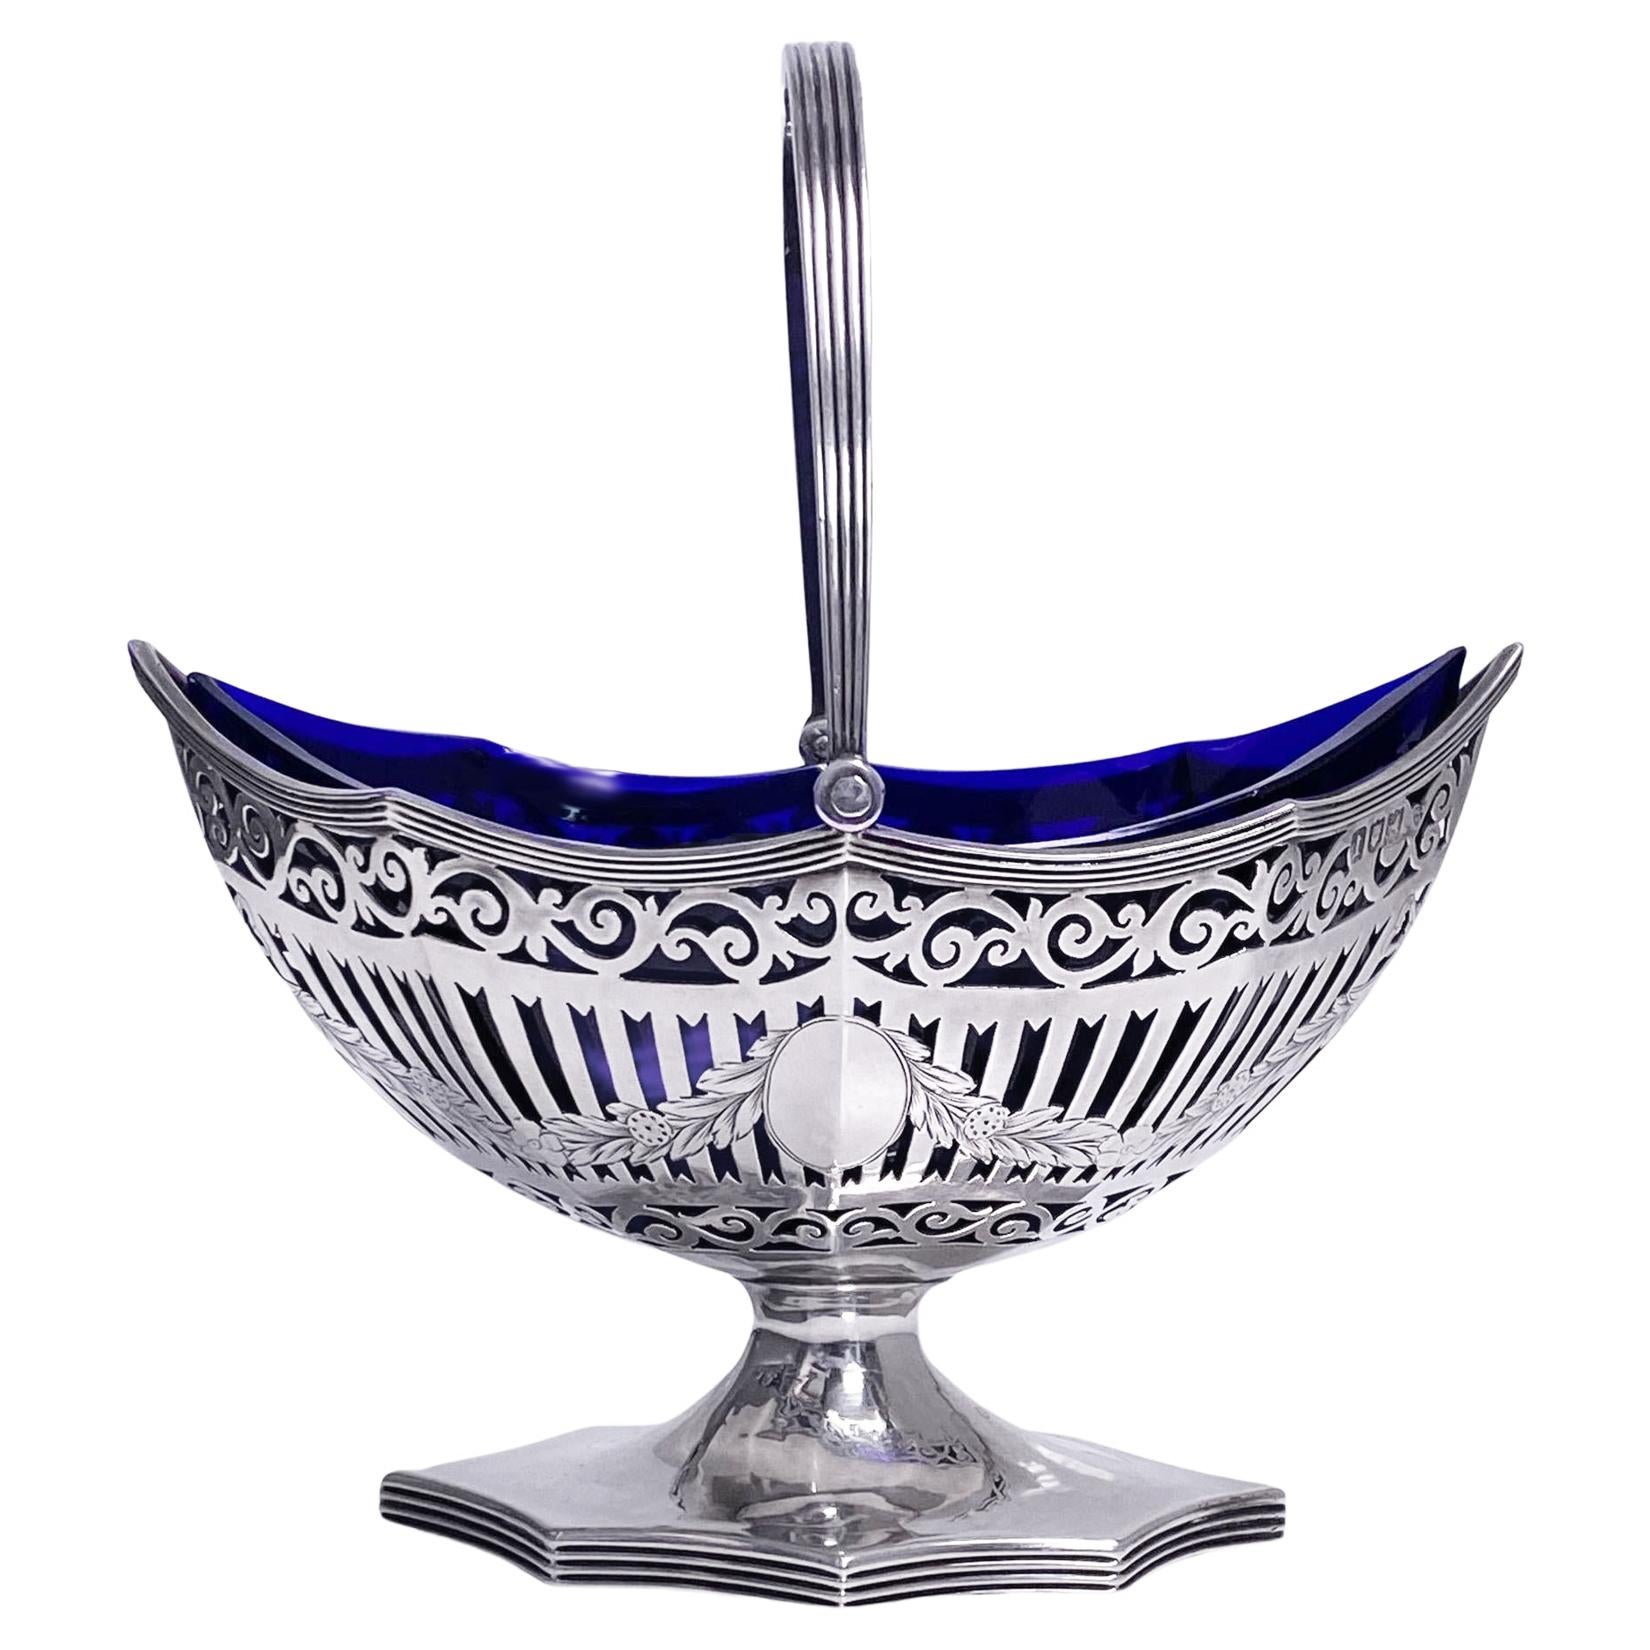 Antique Silver Sugar Basket with cobalt blue glass liner, London 1906 Haseler Bros (Edward John Haseler and Noble Haseler). The pierced swing handled basket of oval scalloped with eight panels surround design, liner conforming in shape. The base